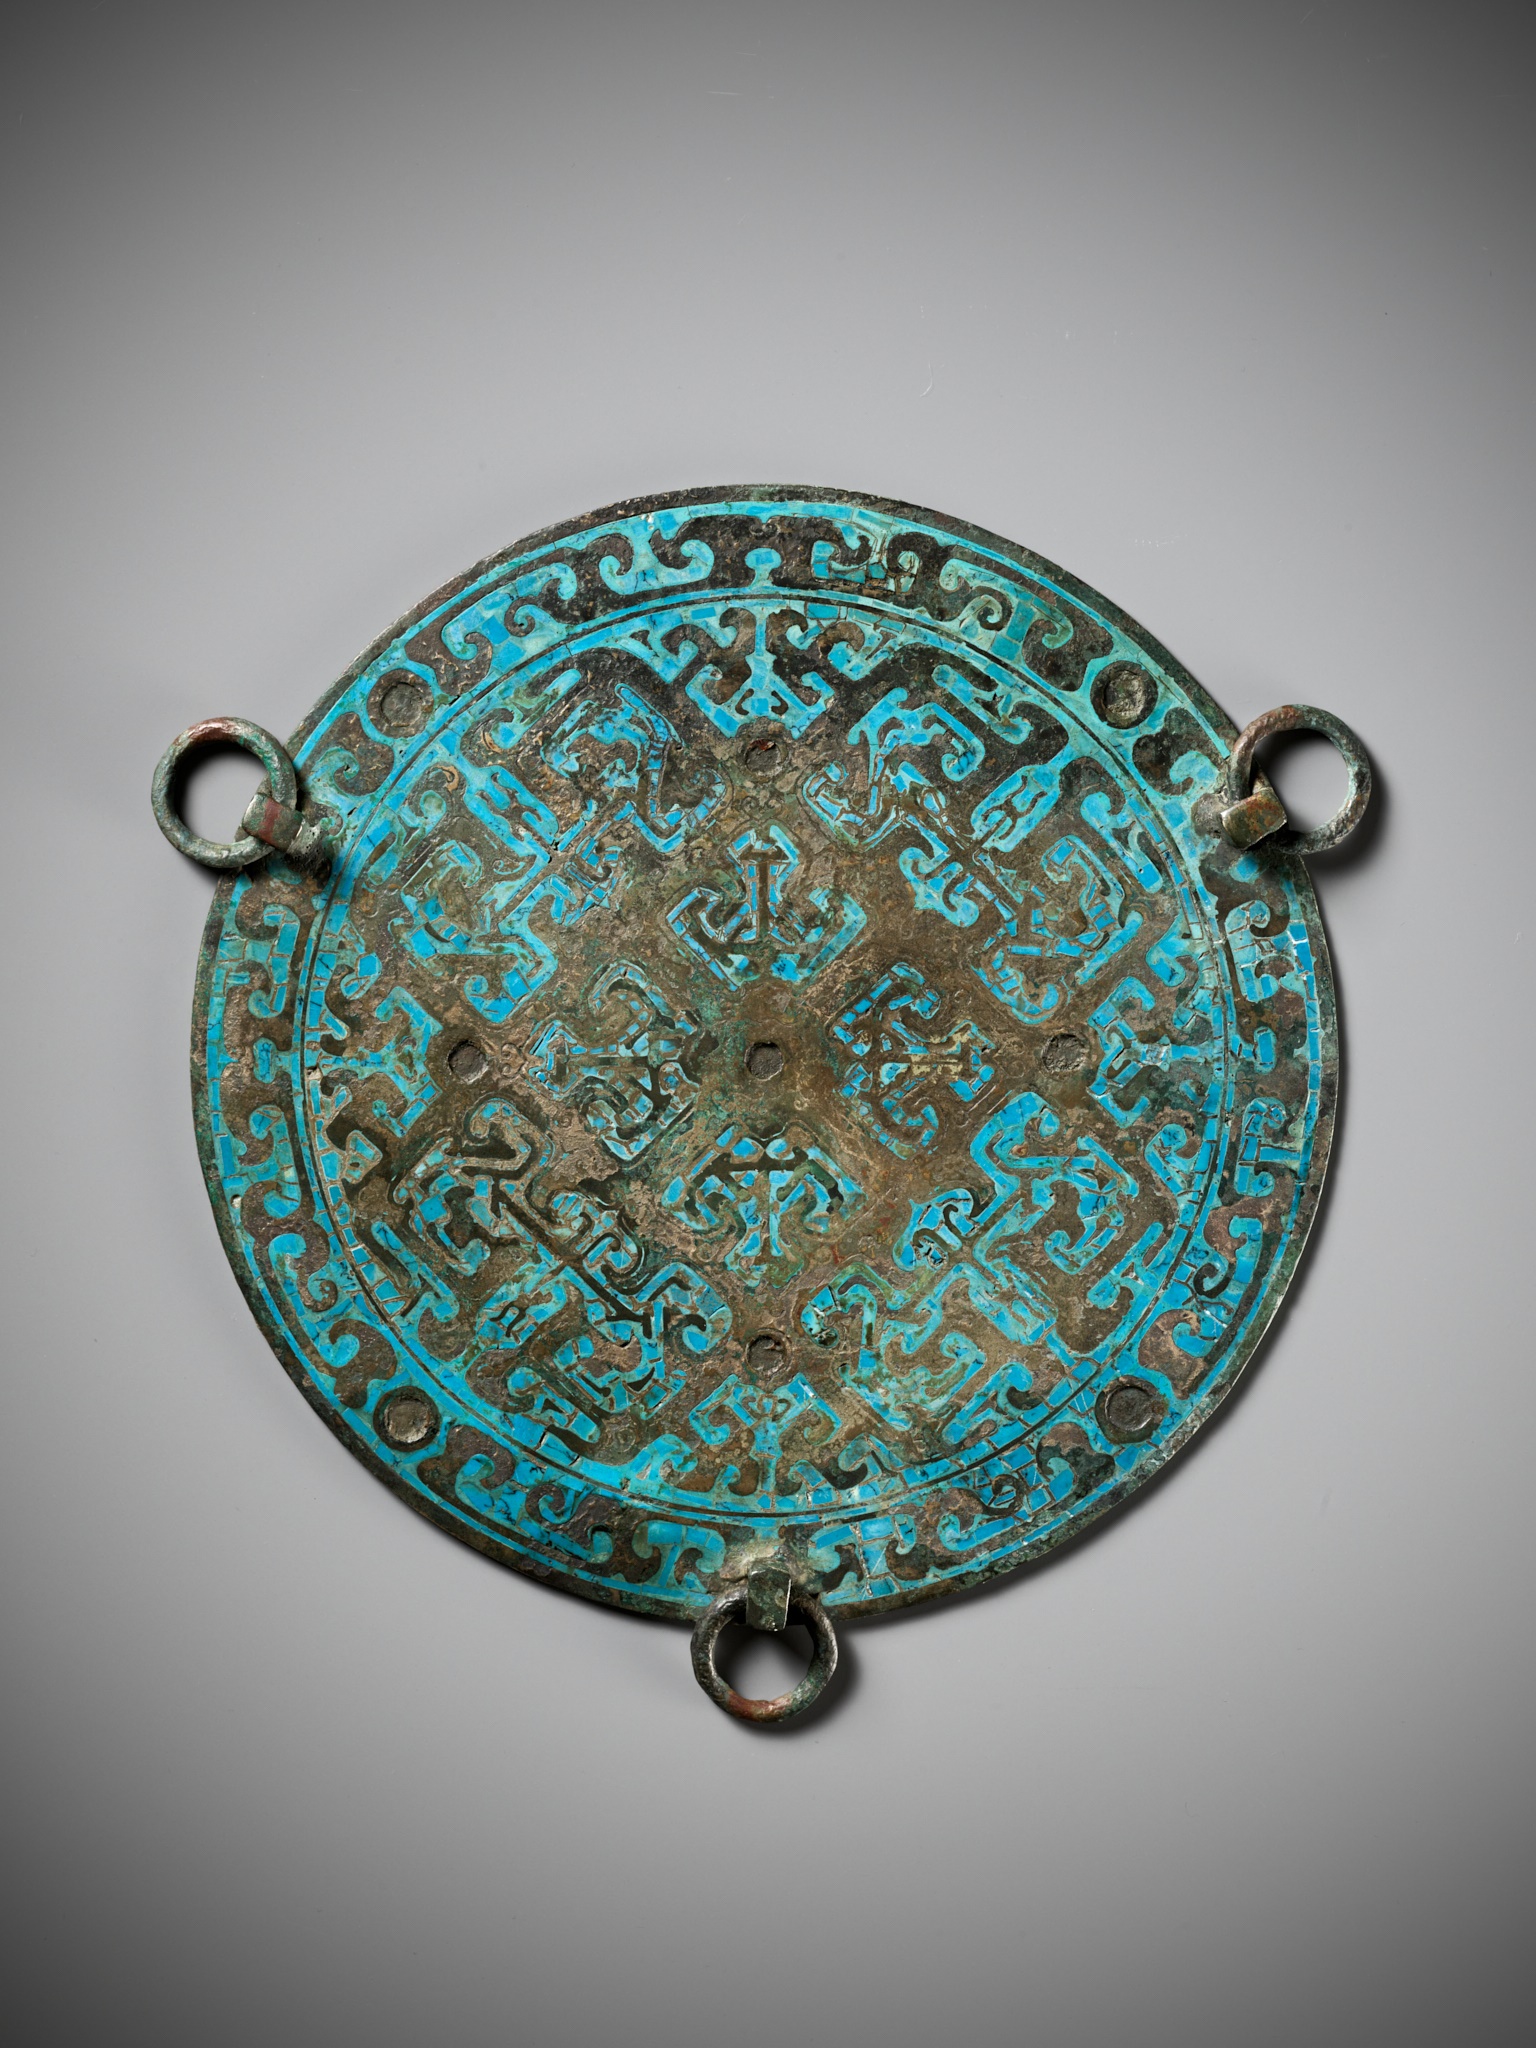 A RARE TURQUOISE-INLAID BRONZE MIRROR, WARRING STATES PERIOD - Image 6 of 13